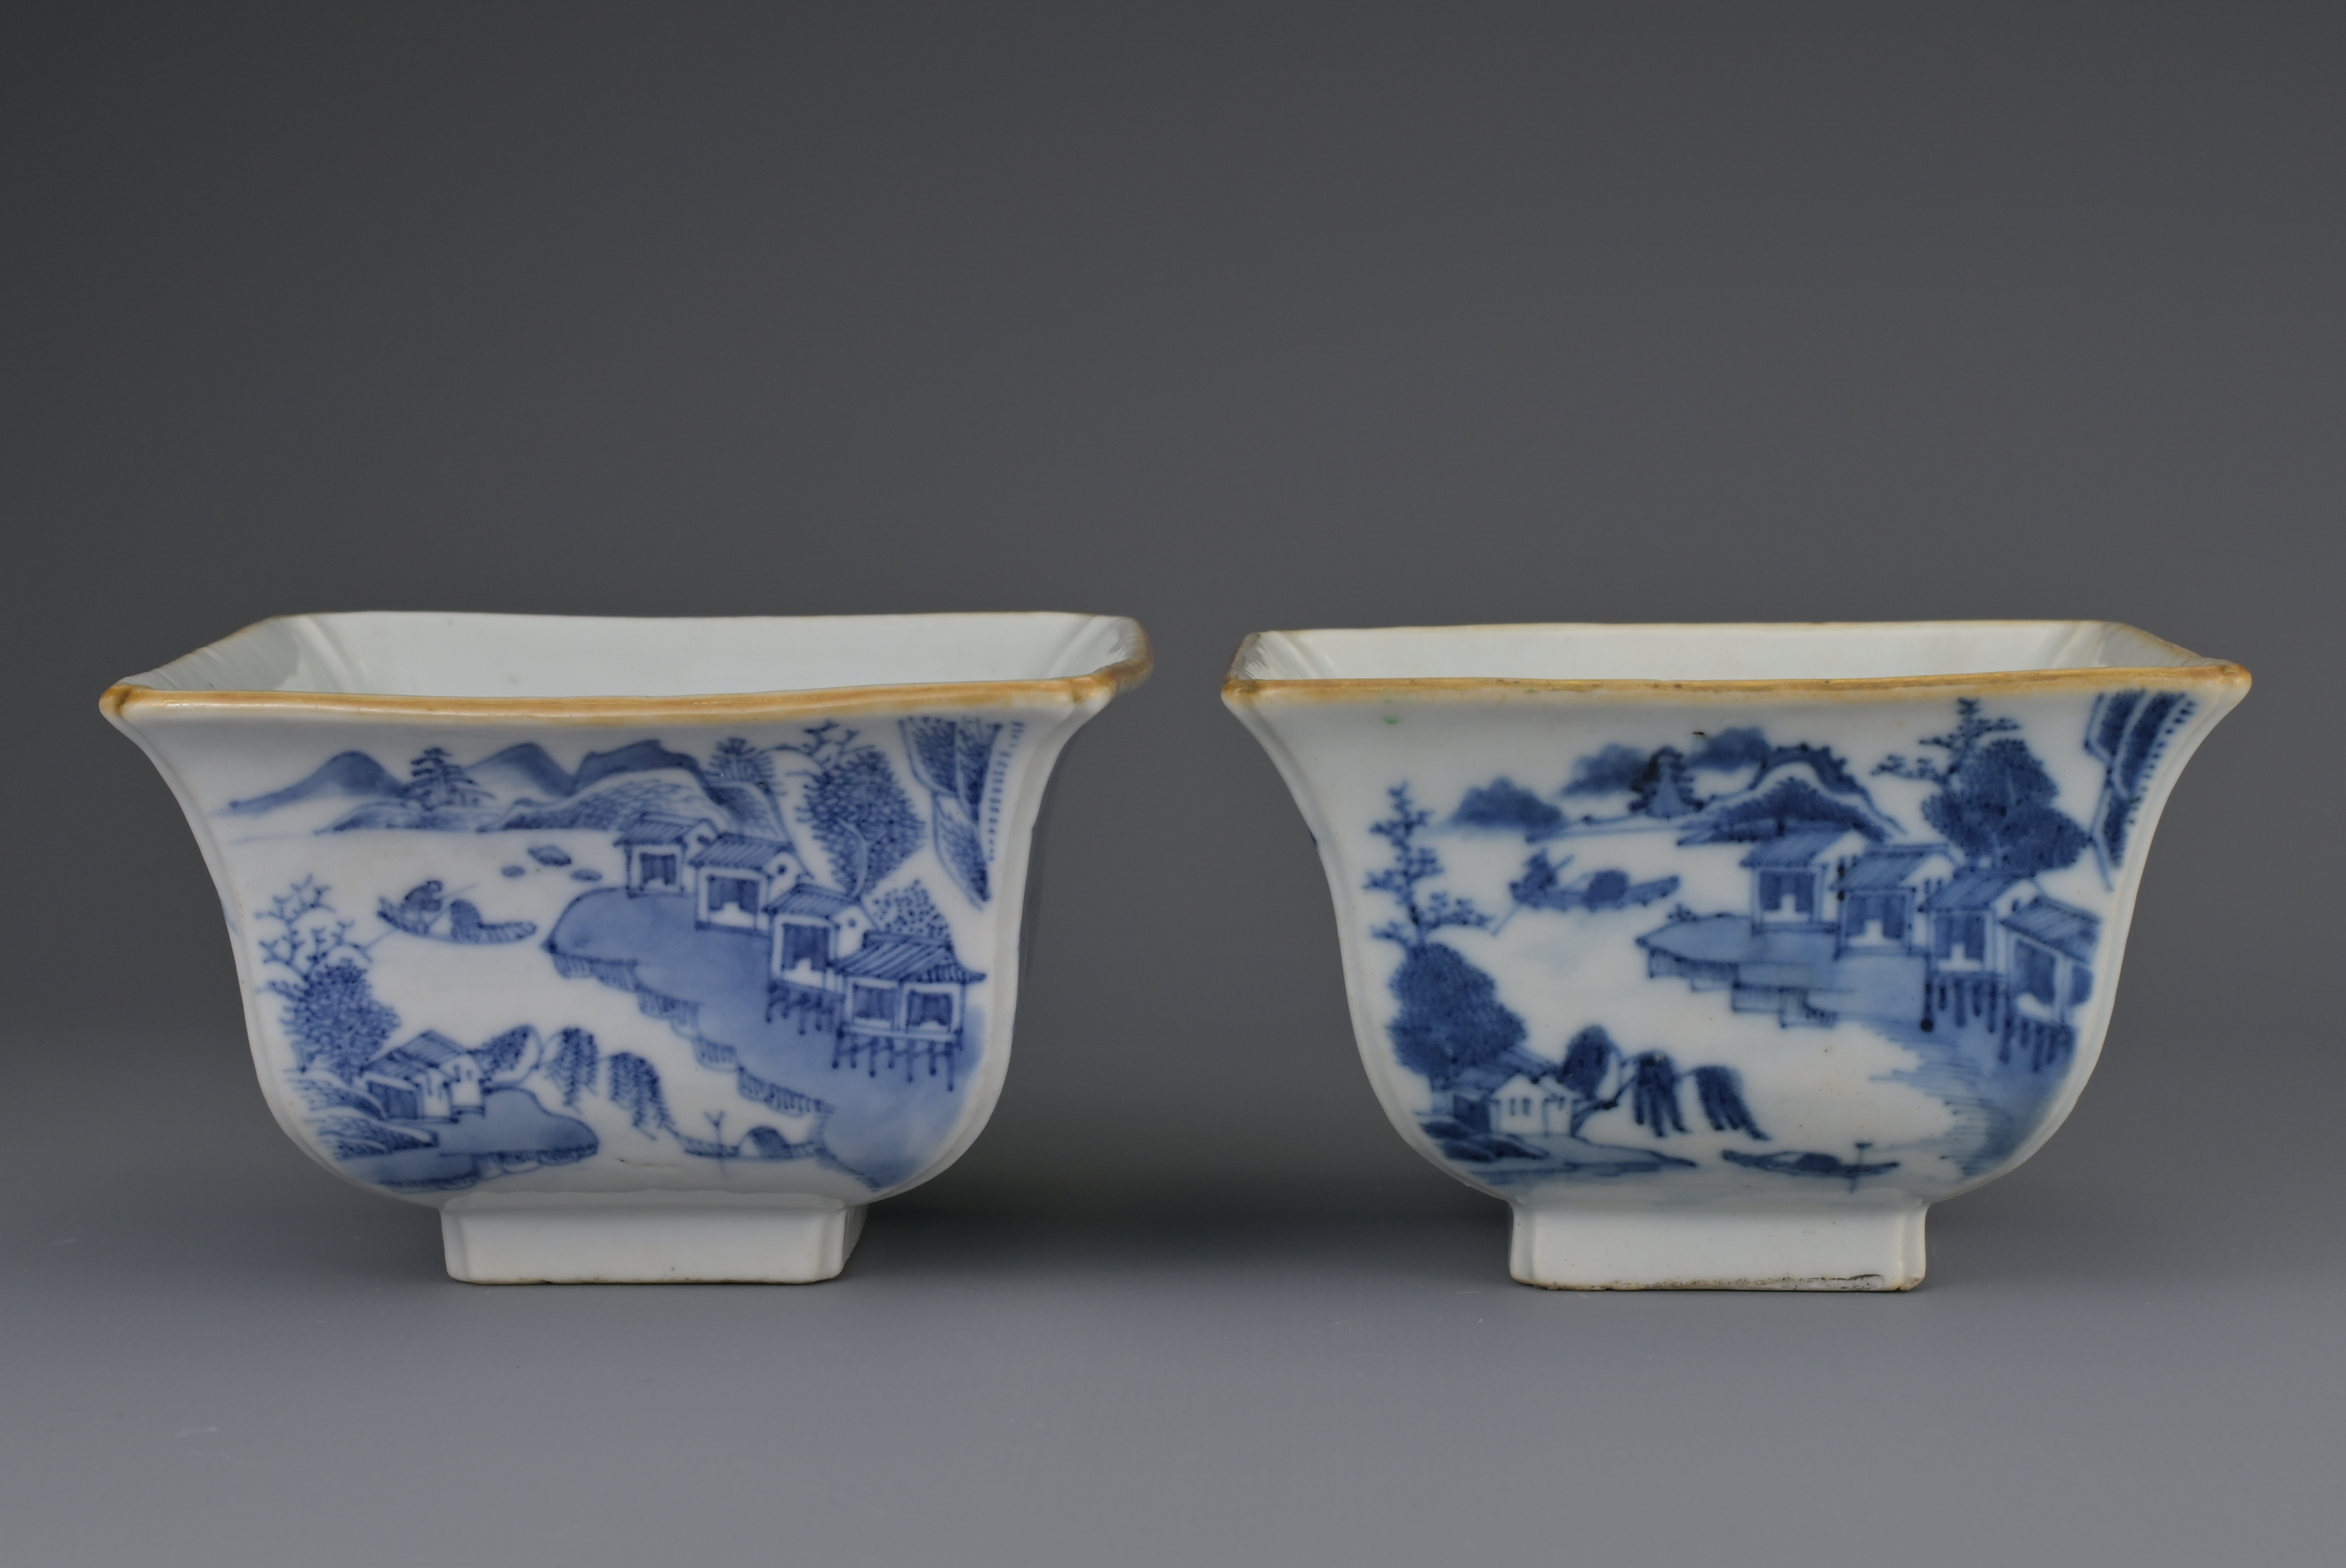 PAIR OF CHINESE BLUE AND WHITE PORCELAIN BOWLS, DAOGUANG MARK AND PERIOD, 19th CENTURY - Image 3 of 9